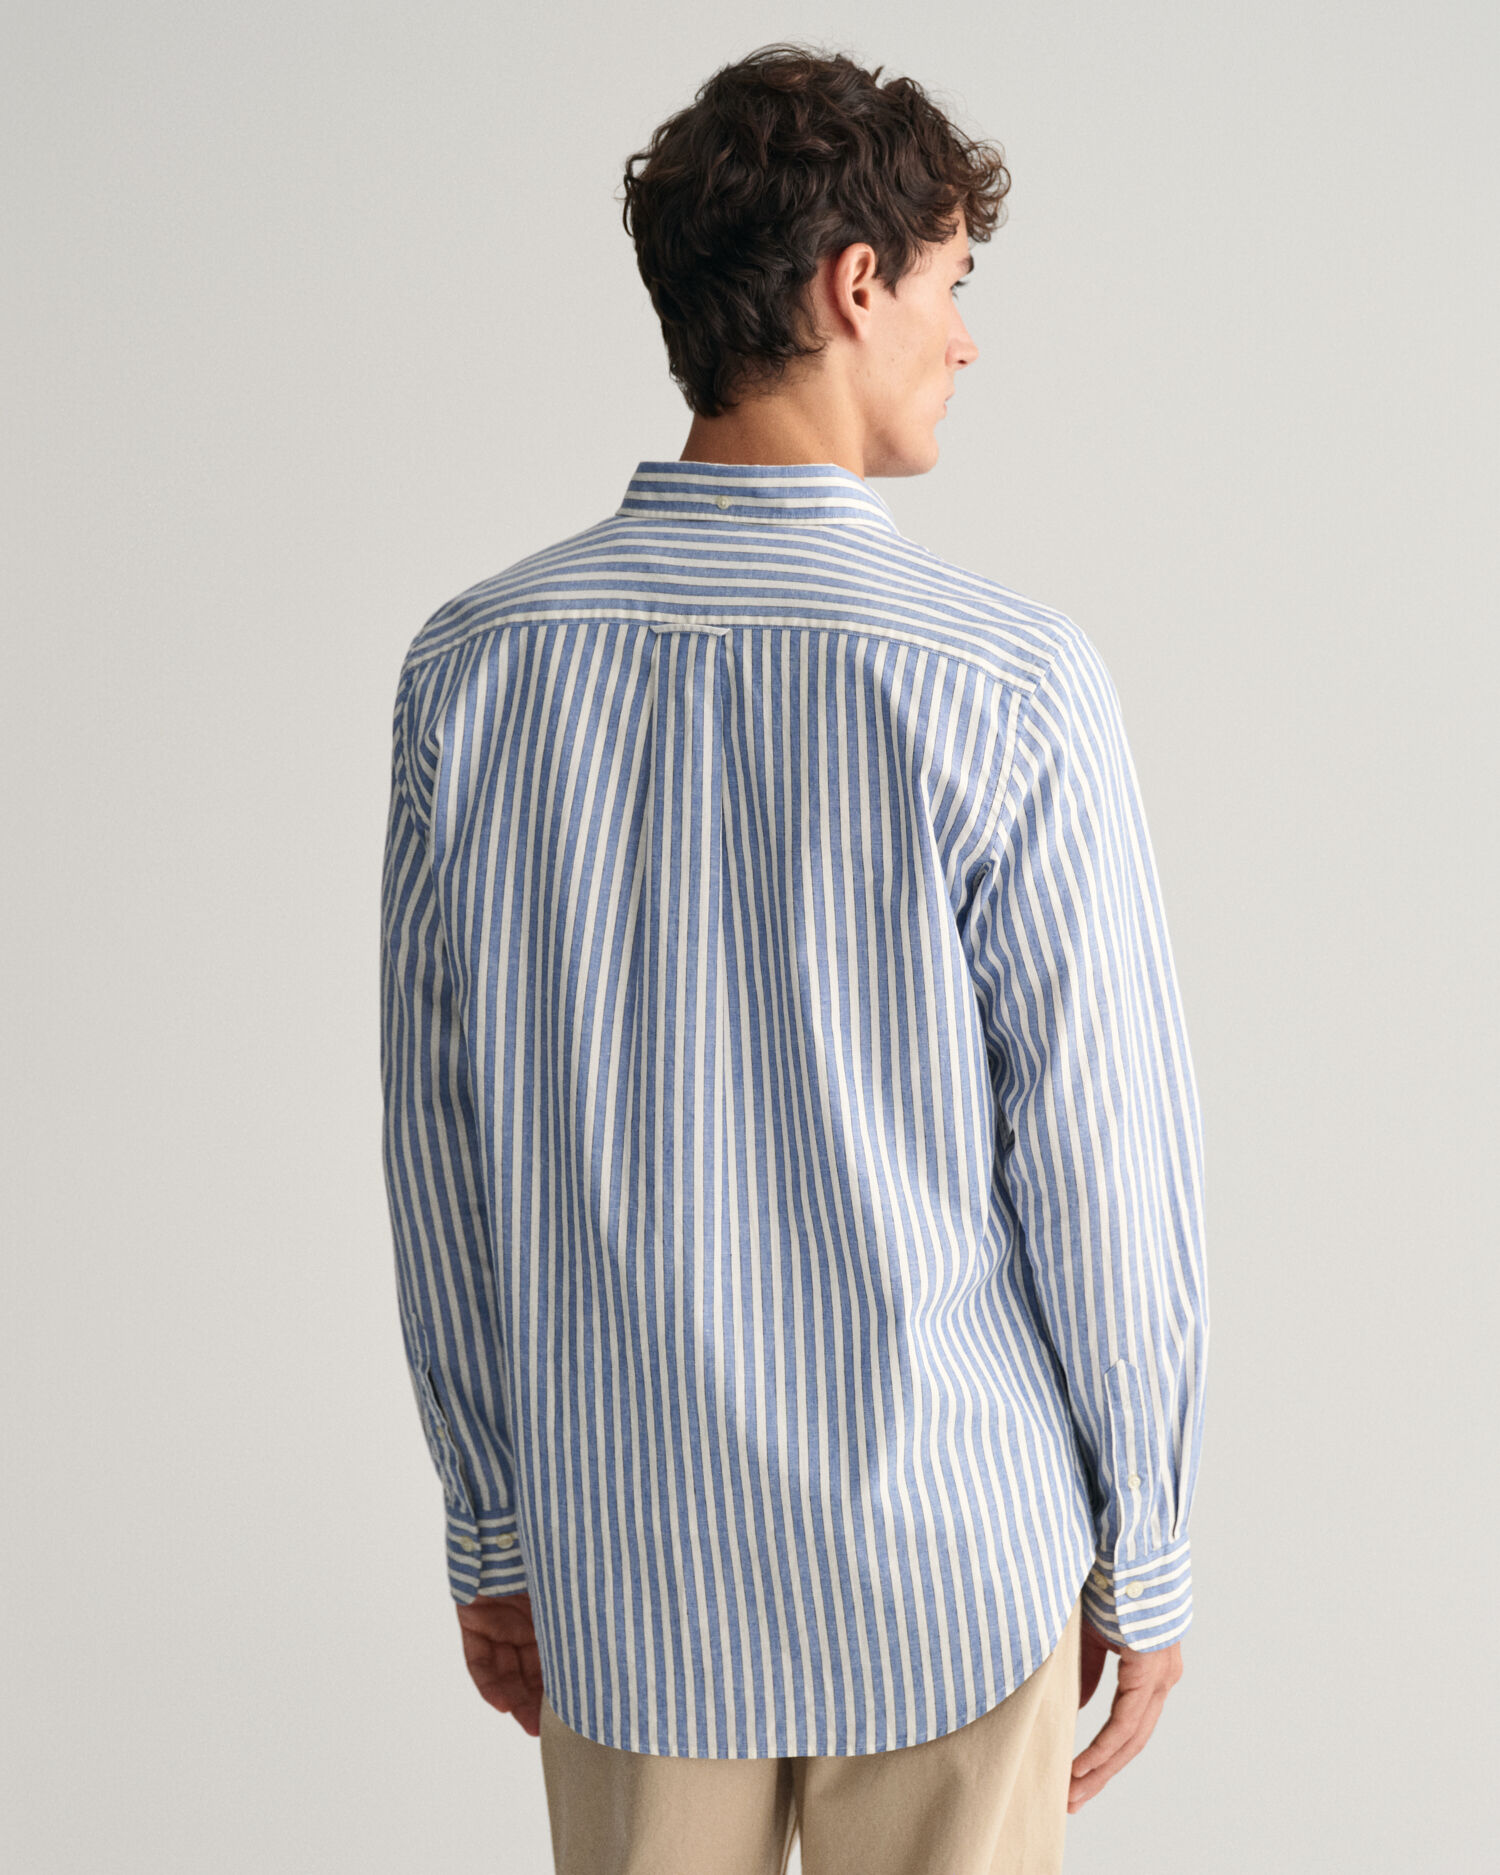 Relaxed Fit Dobby Striped Shirt - GANT